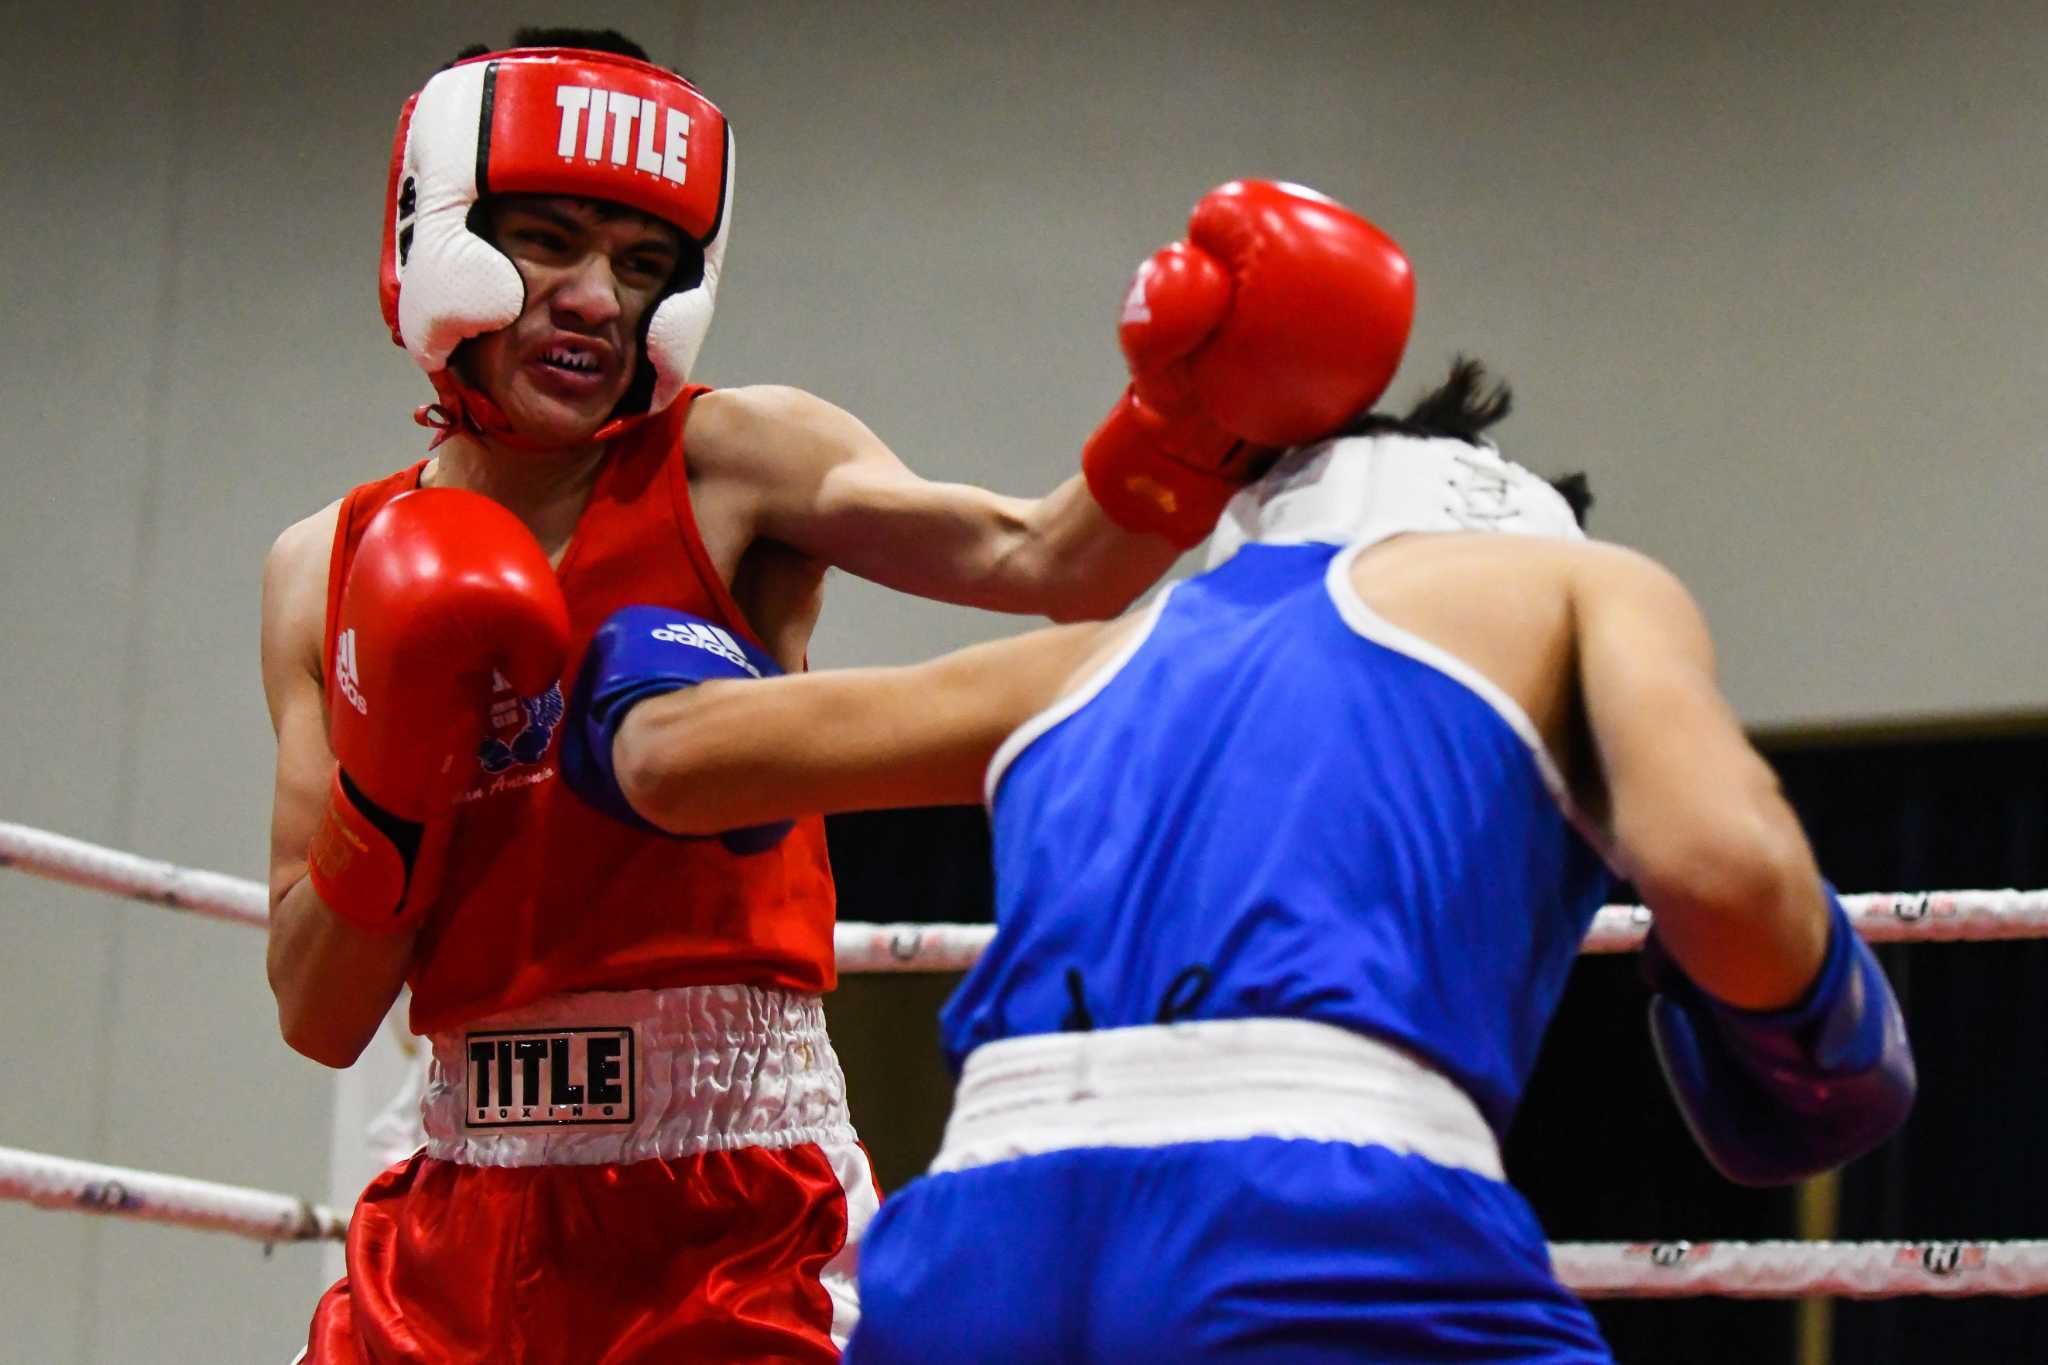 Clint Herrera ekes out Golden Gloves win over Nathan Torres in wild bout